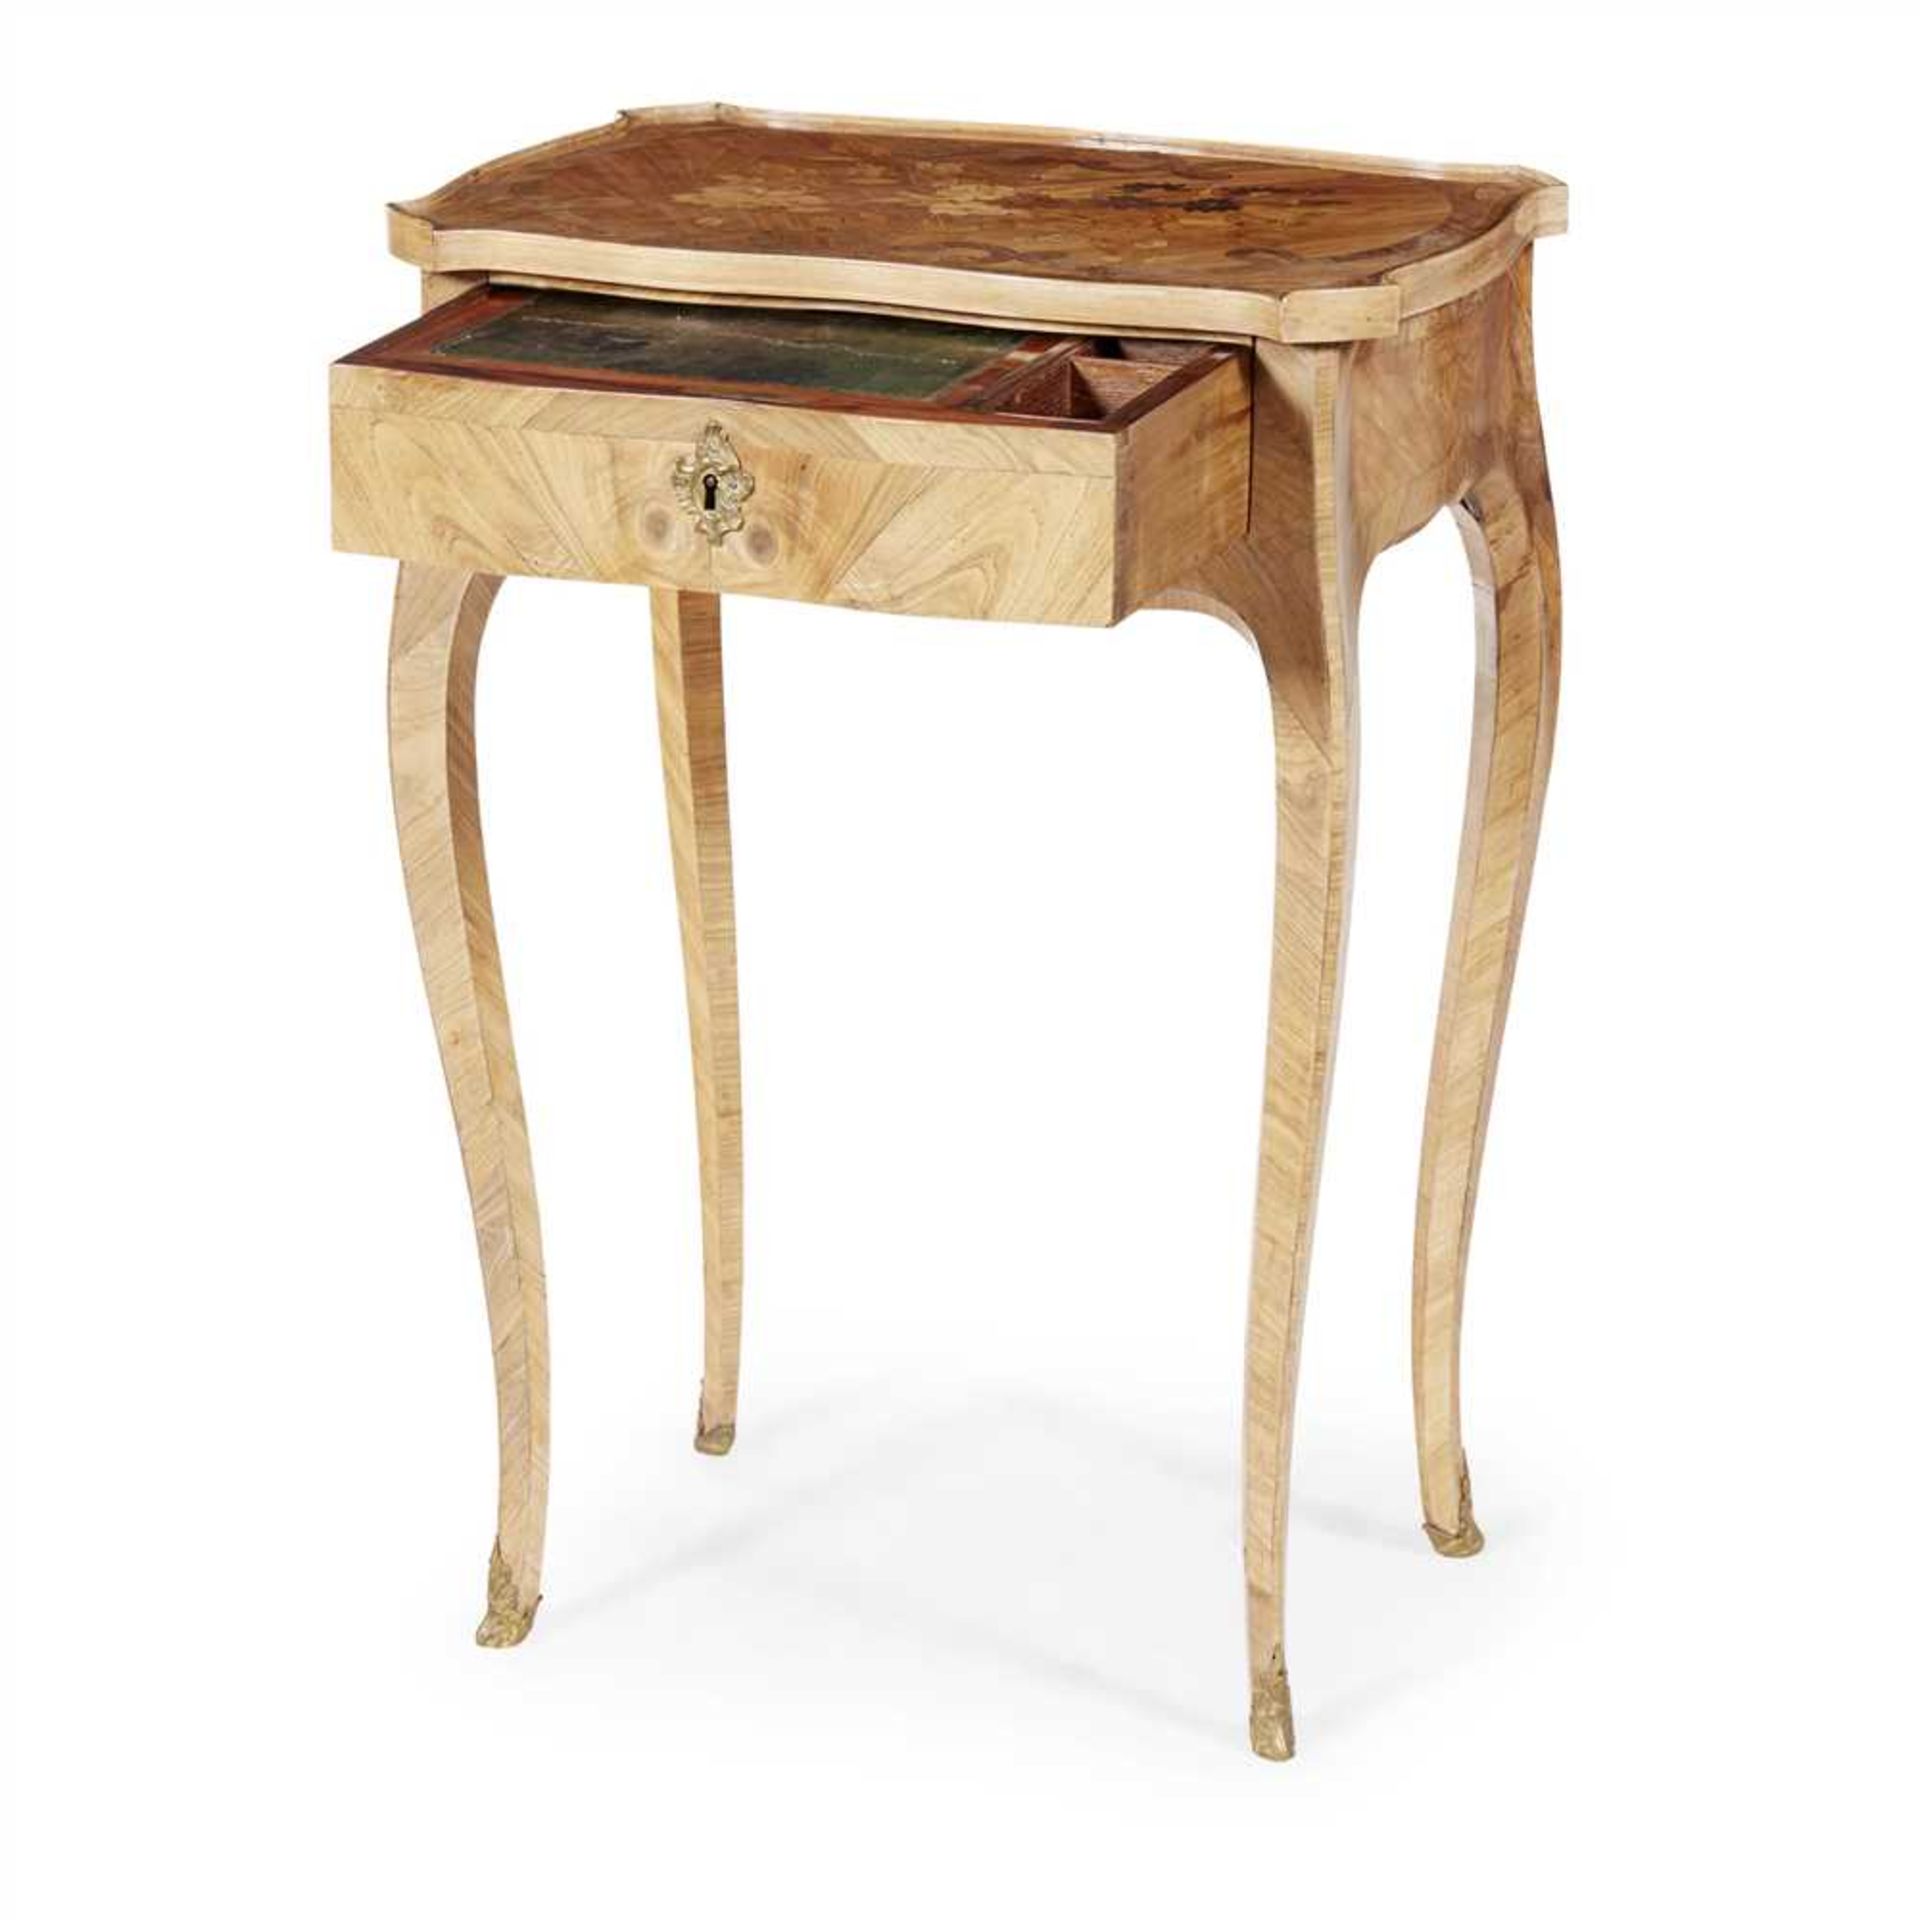 FRENCH KINGWOOD AND MARQUETRY TABLE A ECRIRE LATE 19TH CENTURY - Image 2 of 2